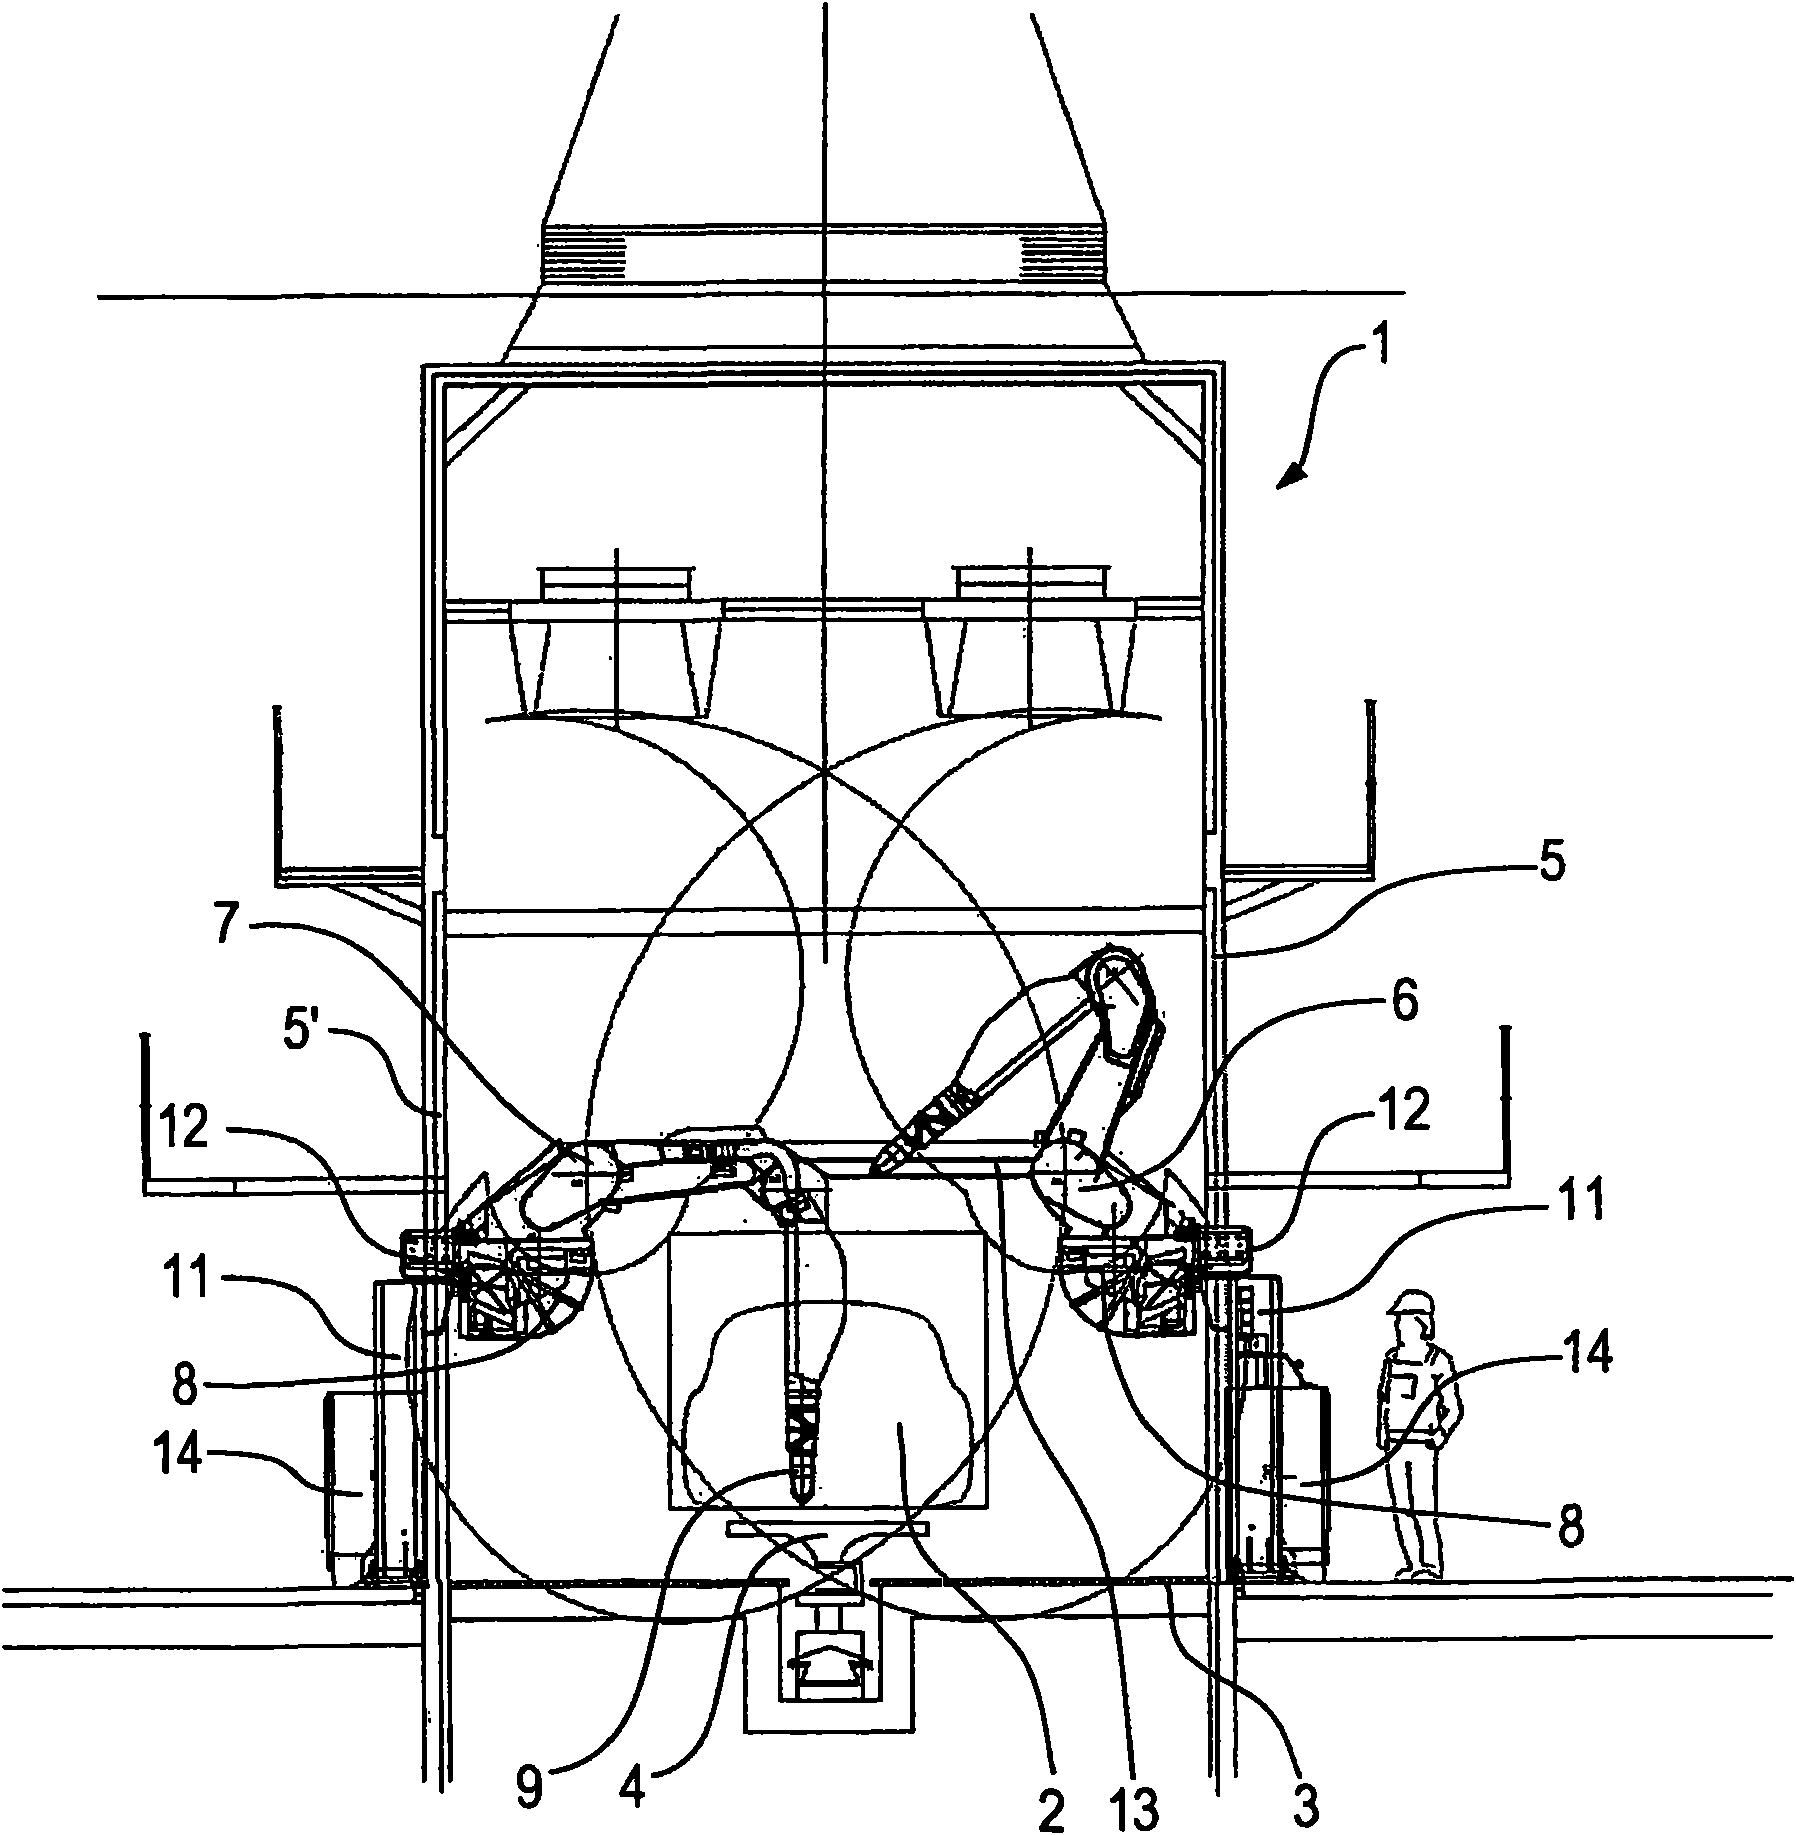 Coating system and method for the series coating of workpieces